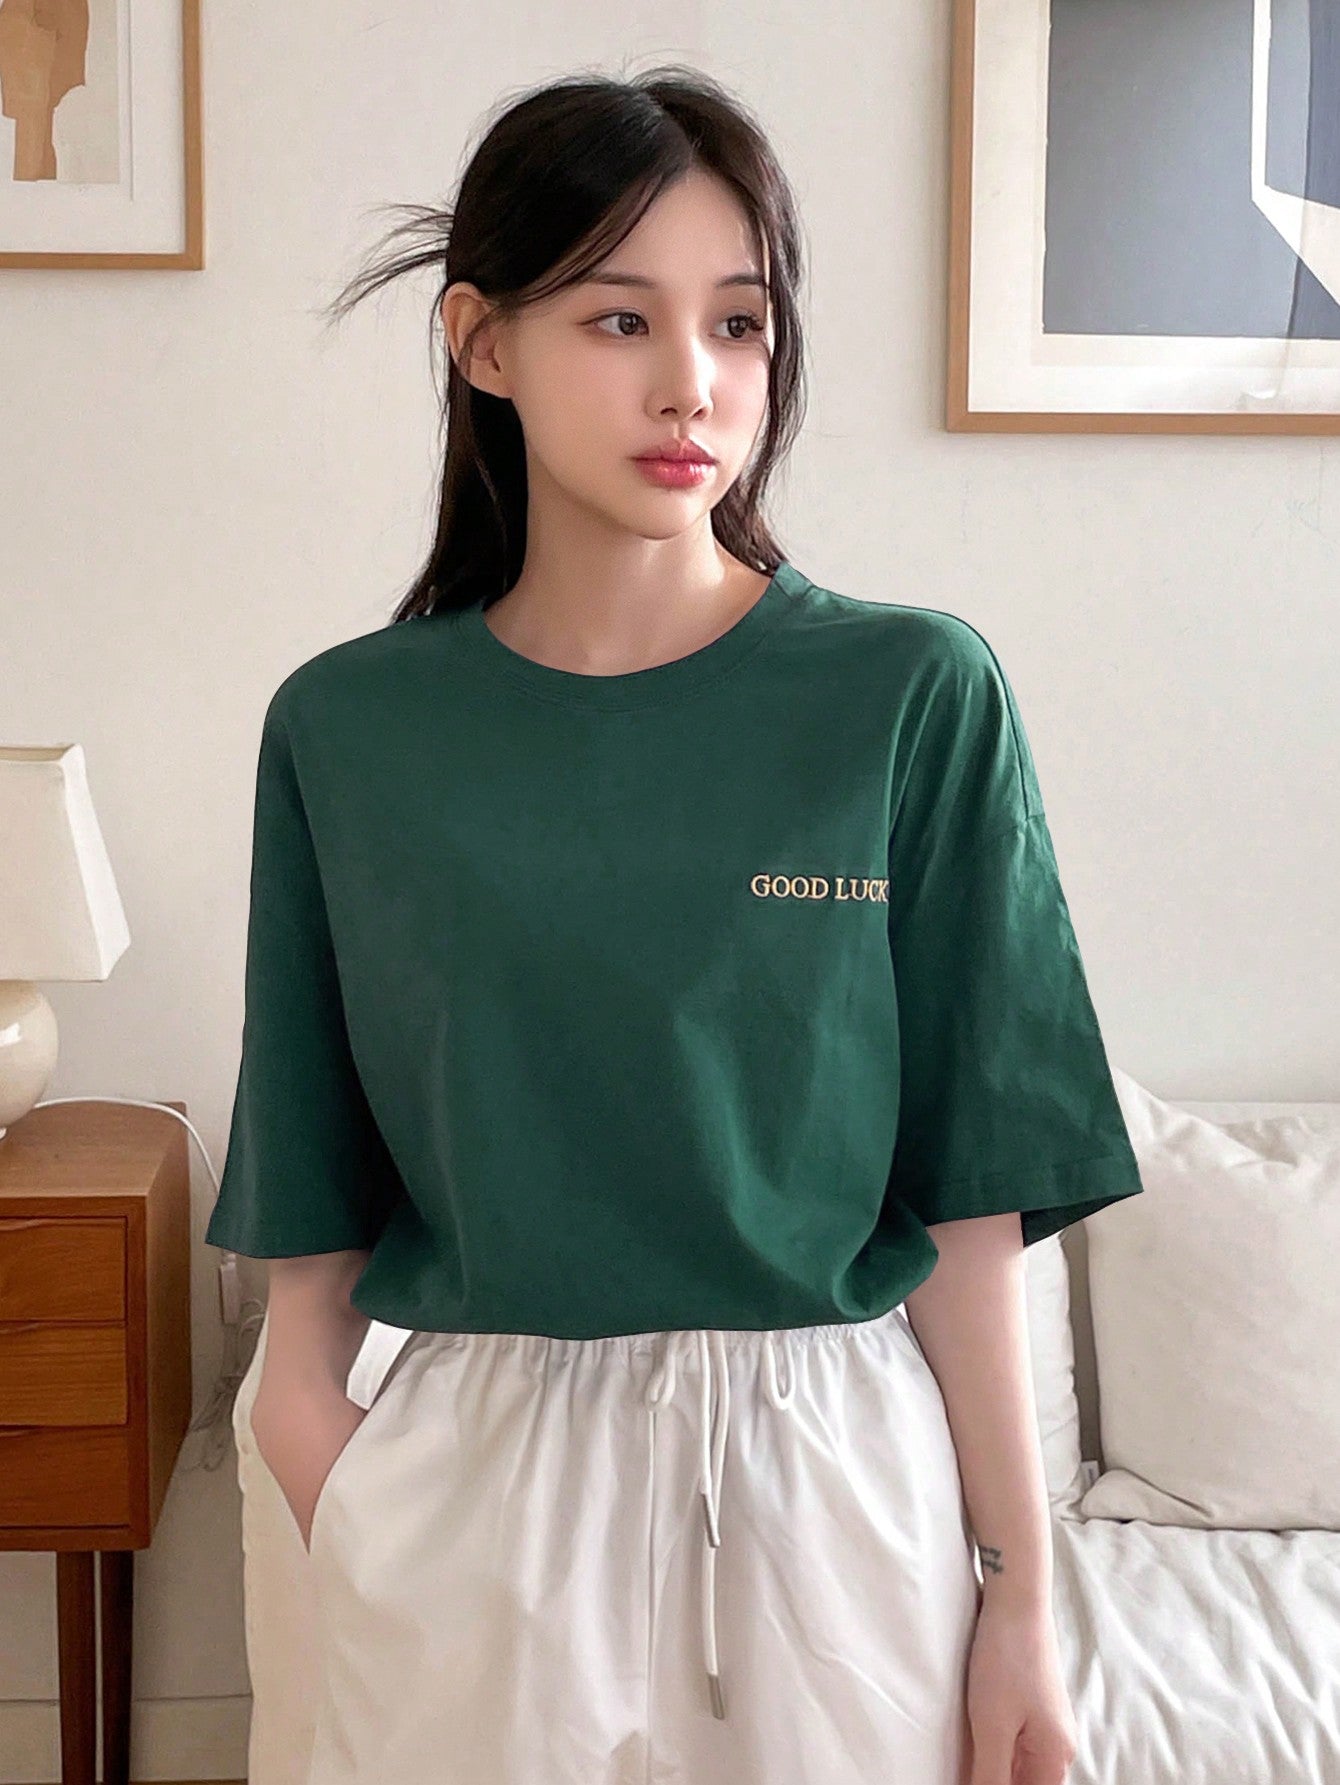 Women's Summer Casual Round Neck Drop Shoulder Sleeve T-Shirt With Letter Print